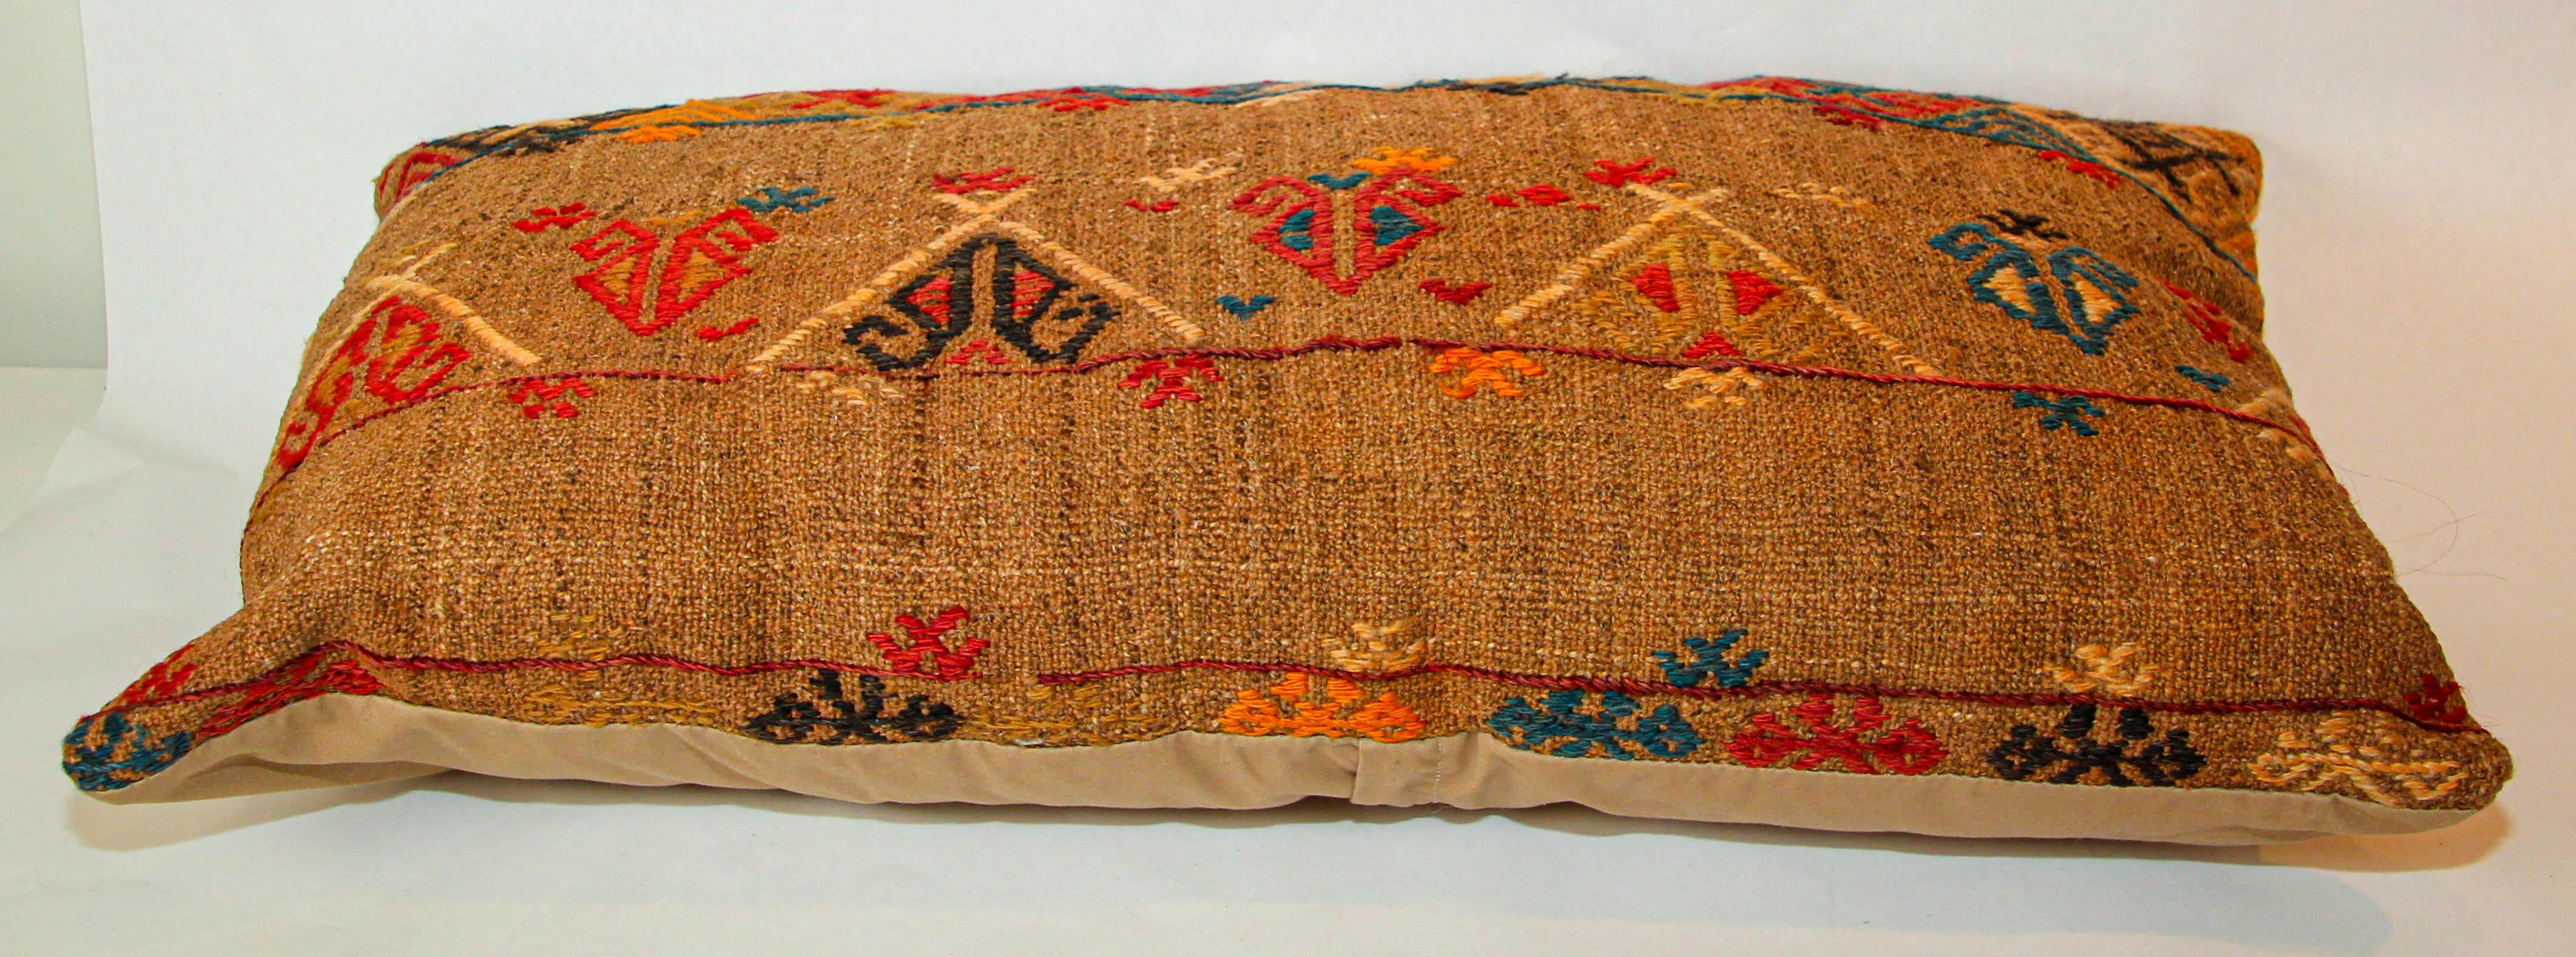 Vintage Moroccan Berber Pillow Hand-Woven Rug Pillow For Sale 1